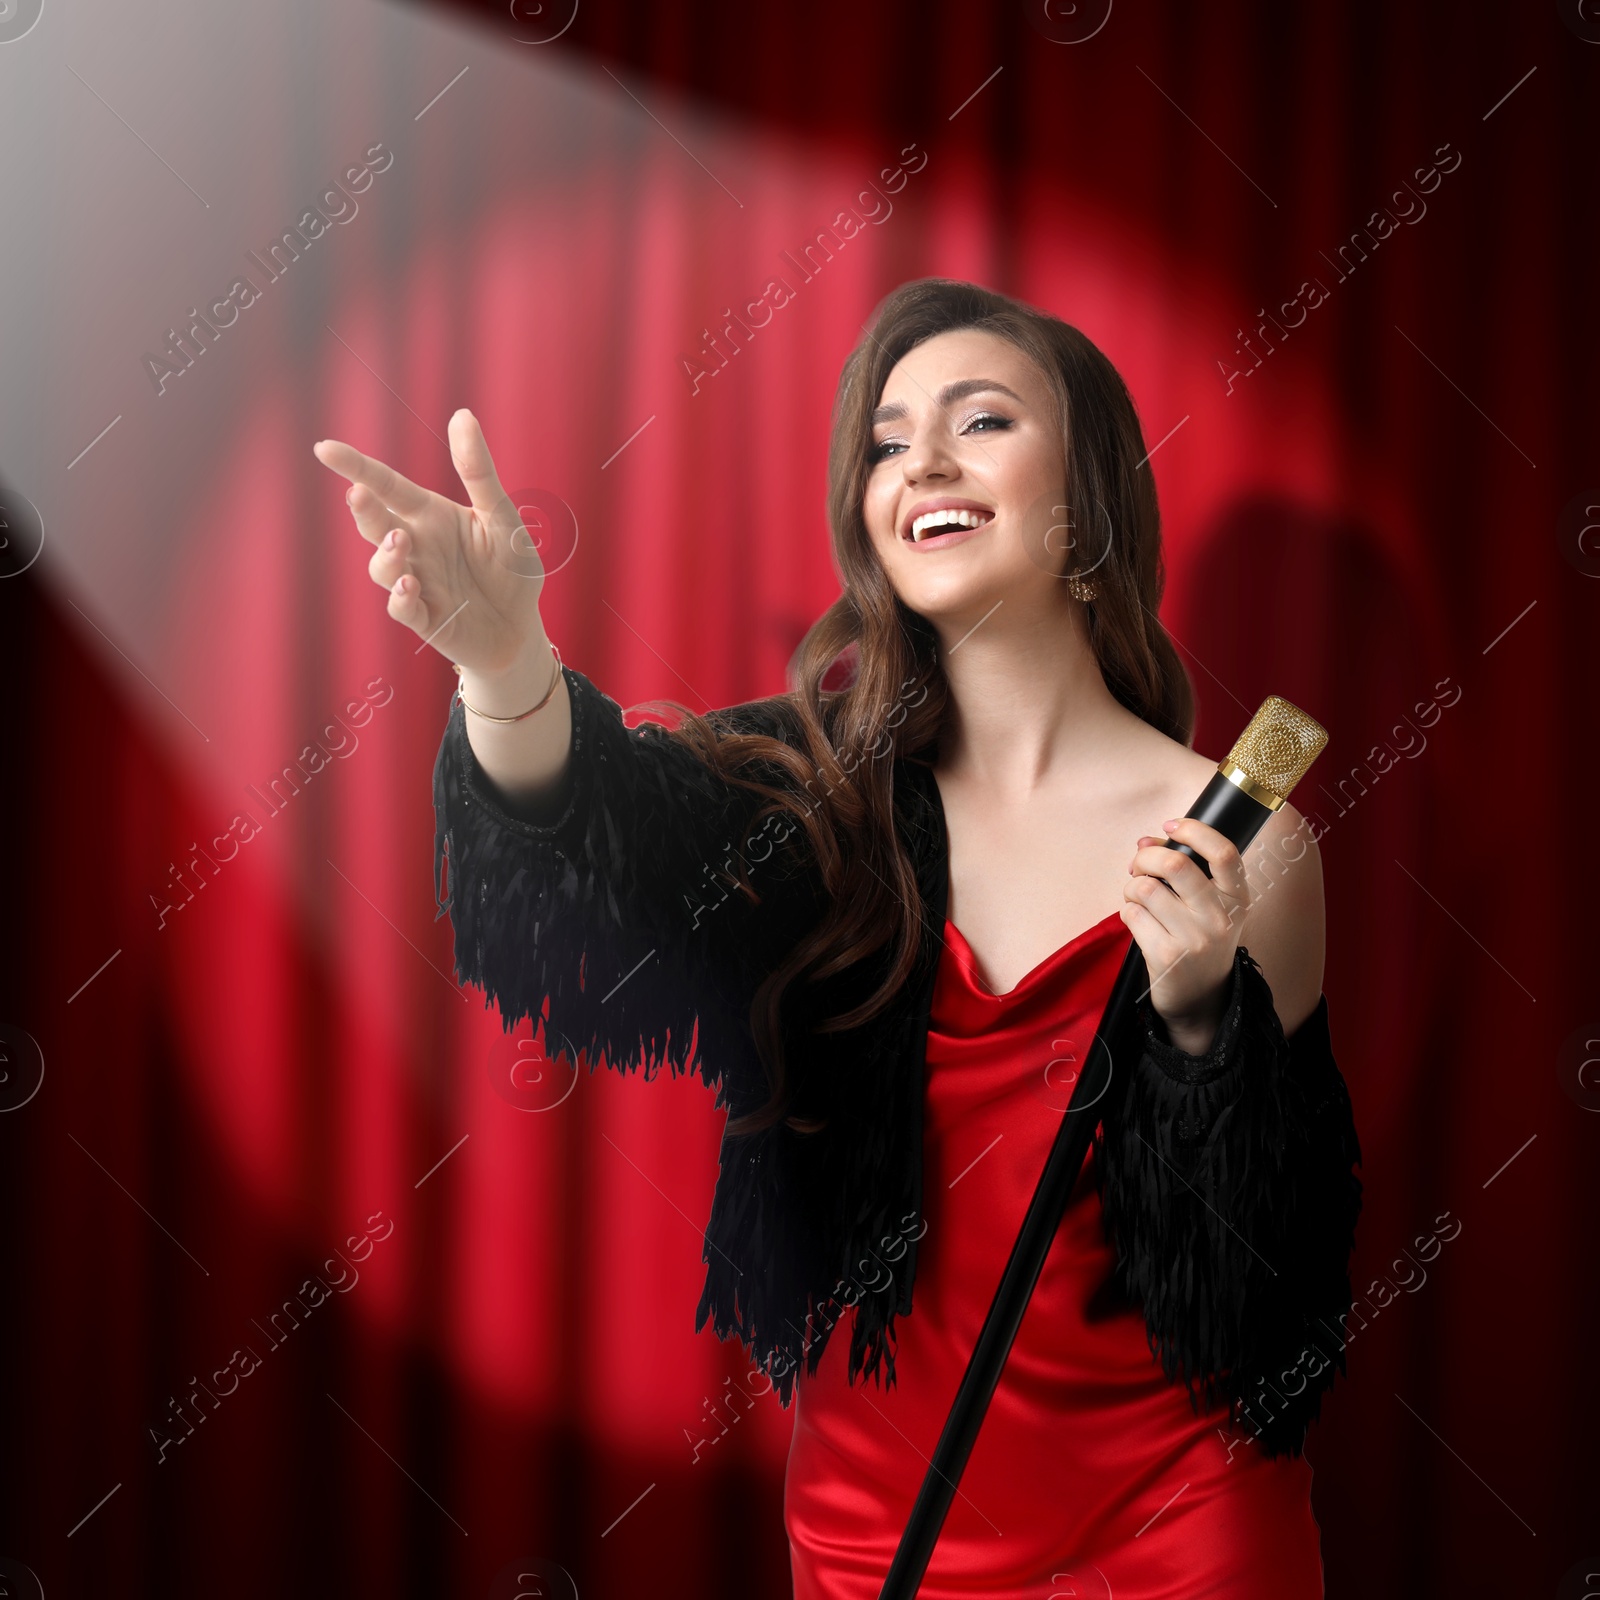 Image of Beautiful singer performing in spotlight on stage against red curtain